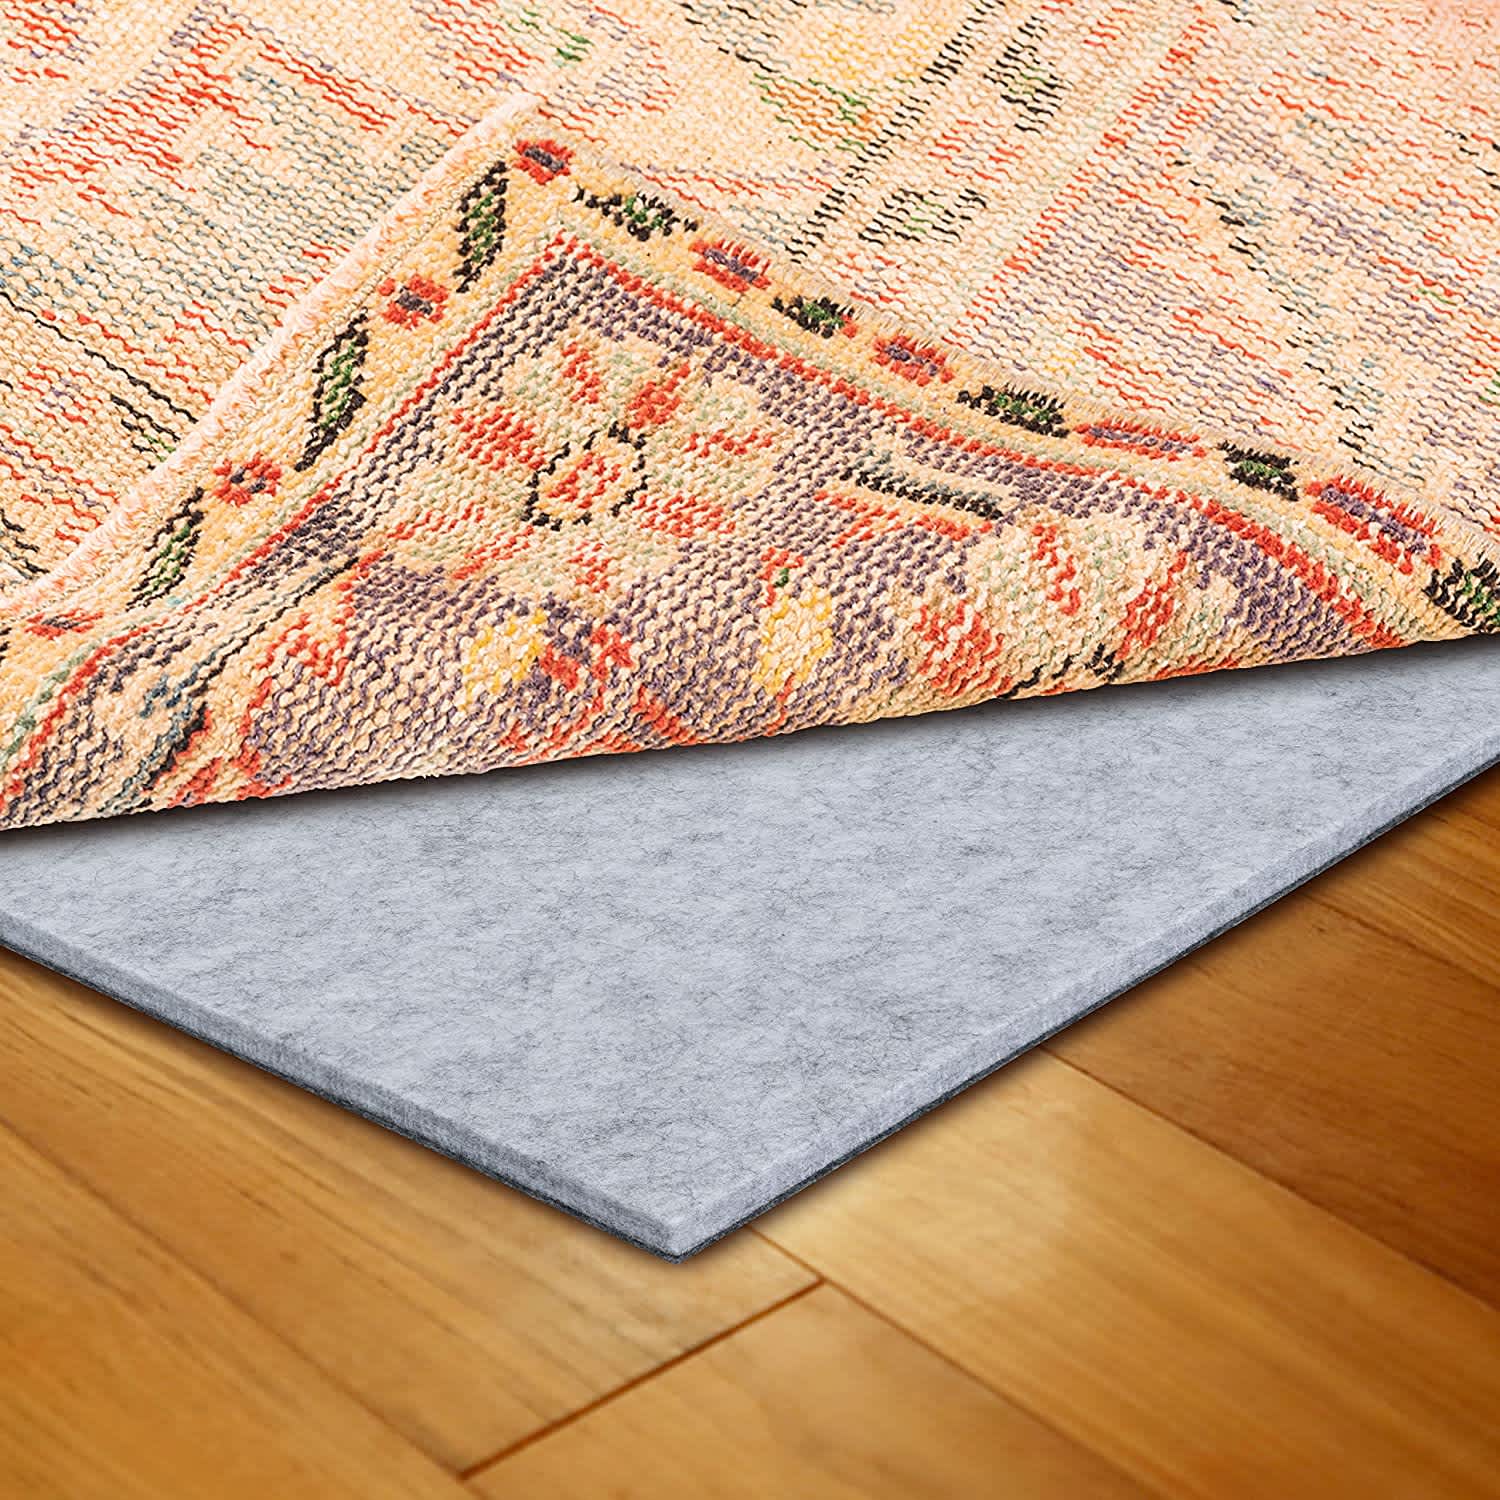 http://cdn.apartmenttherapy.info/image/upload/v1686066493/gen-workflow/product-database/Sonic_Acoustics_Non_Slip_Soundproof_Rug_Pad.jpg